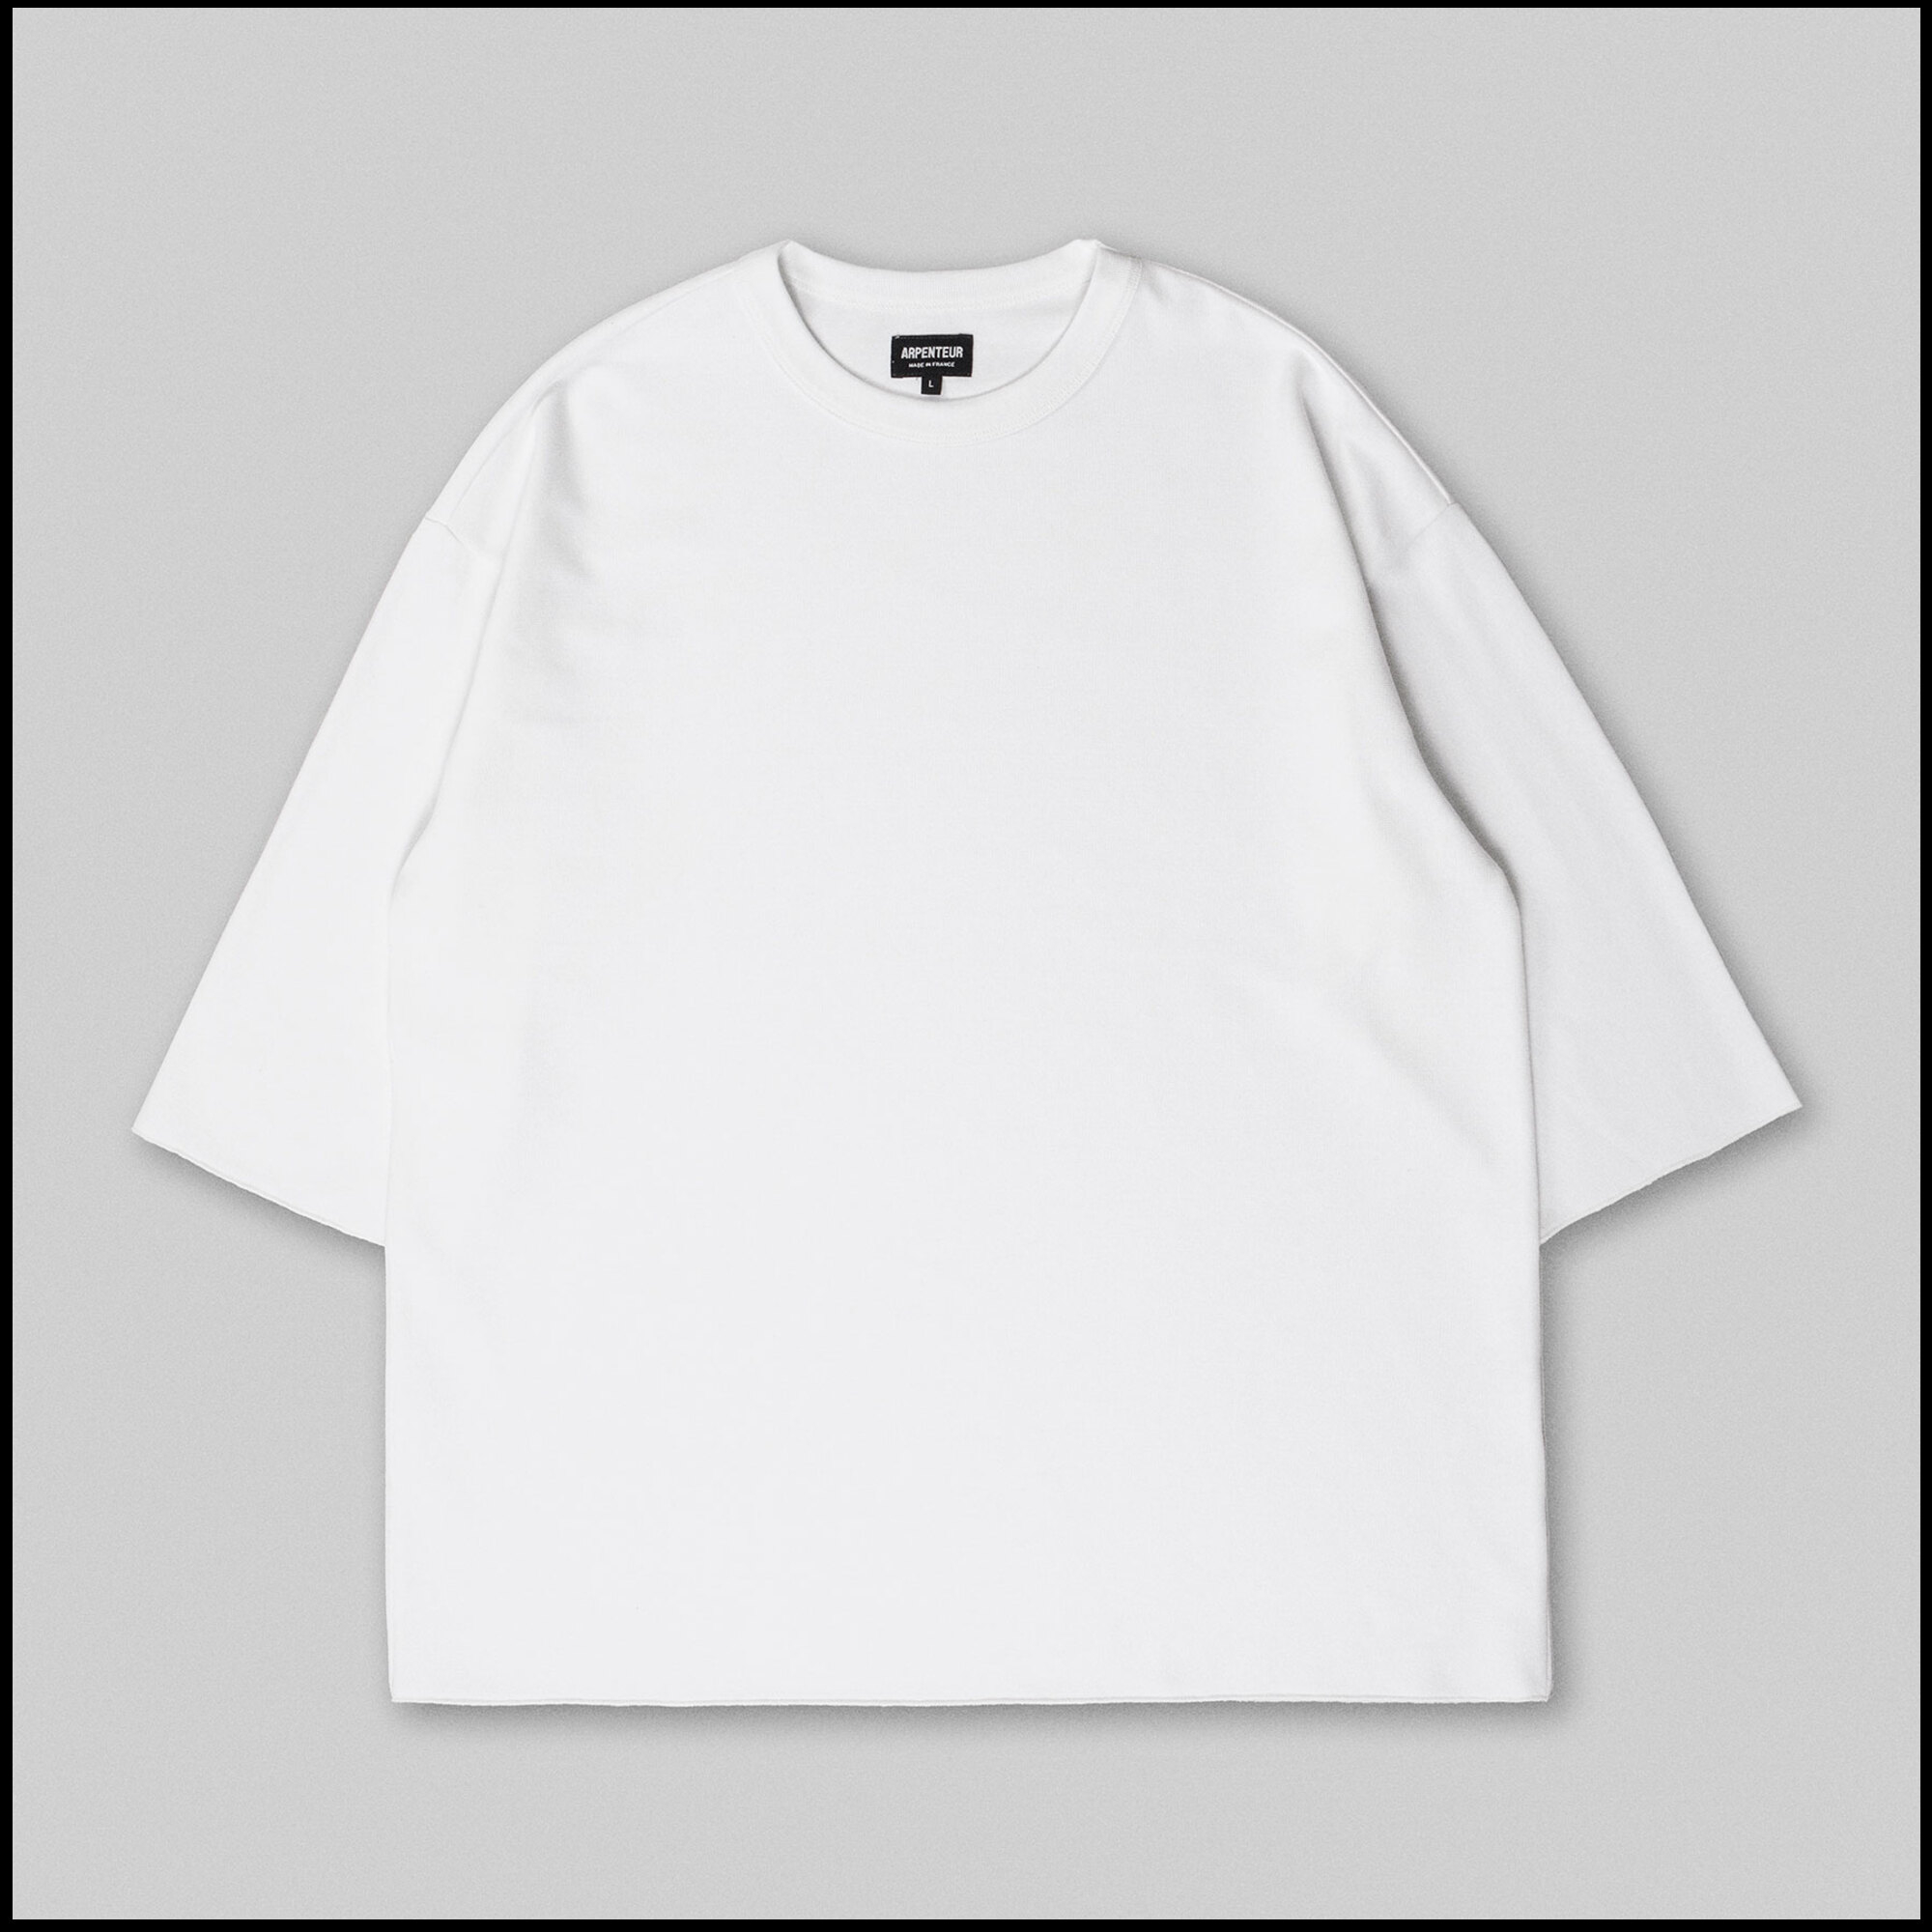 MARINIERE t-shirt by Arpenteur in White color